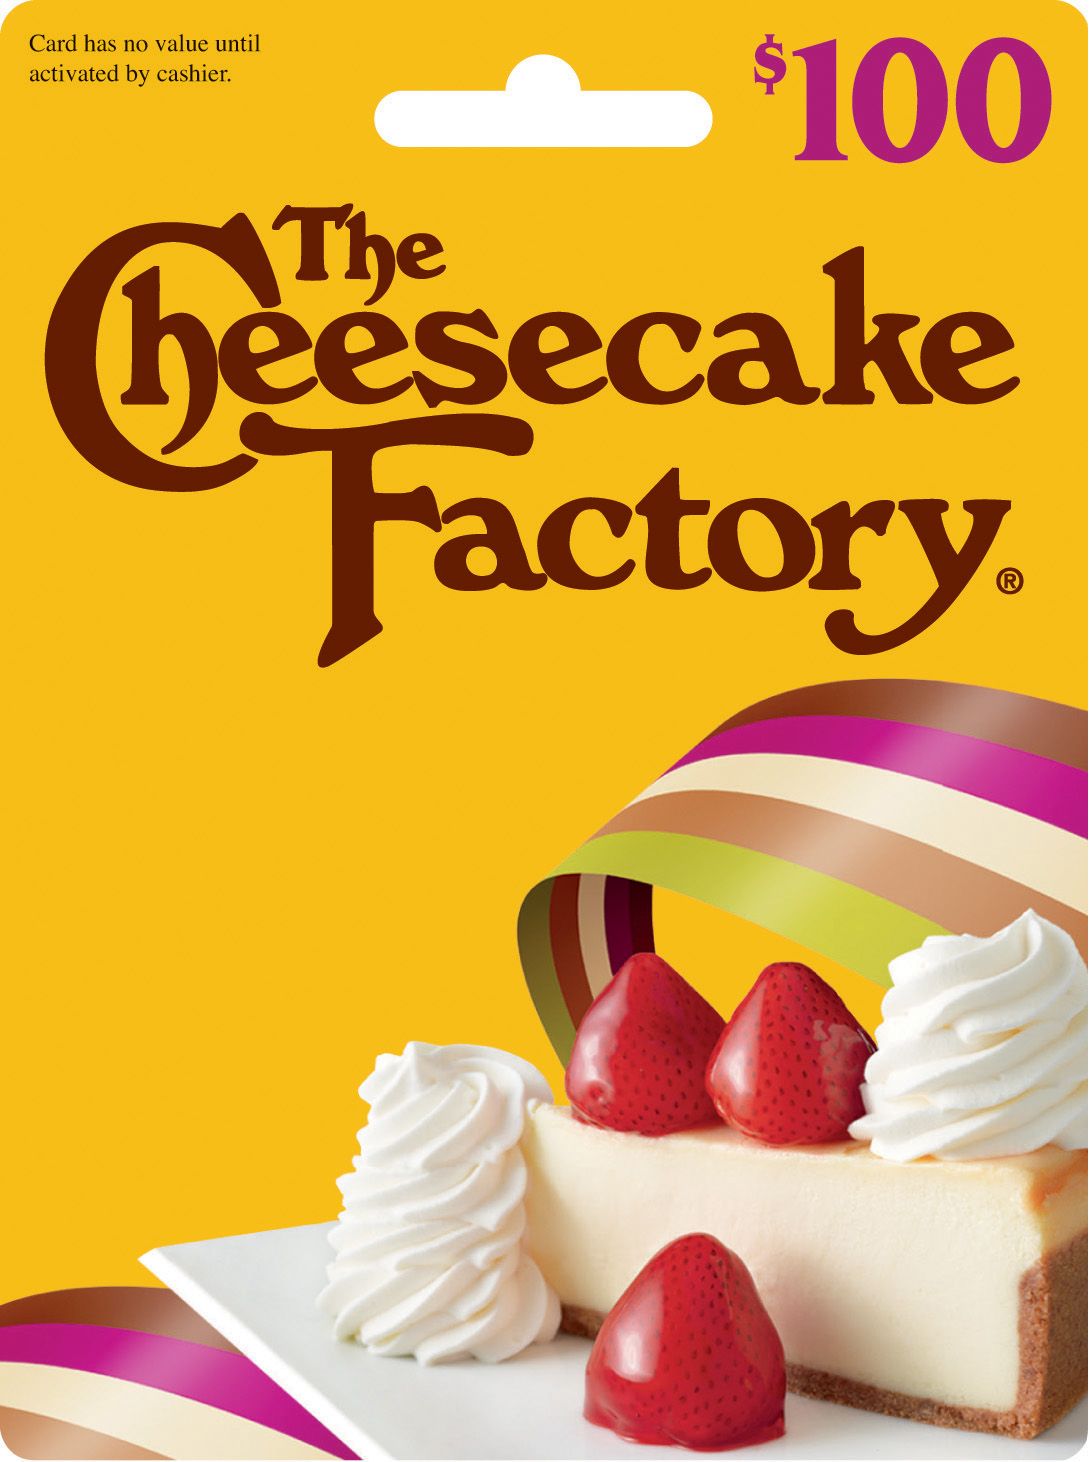 $100 The Cheesecake Factory Gift Card